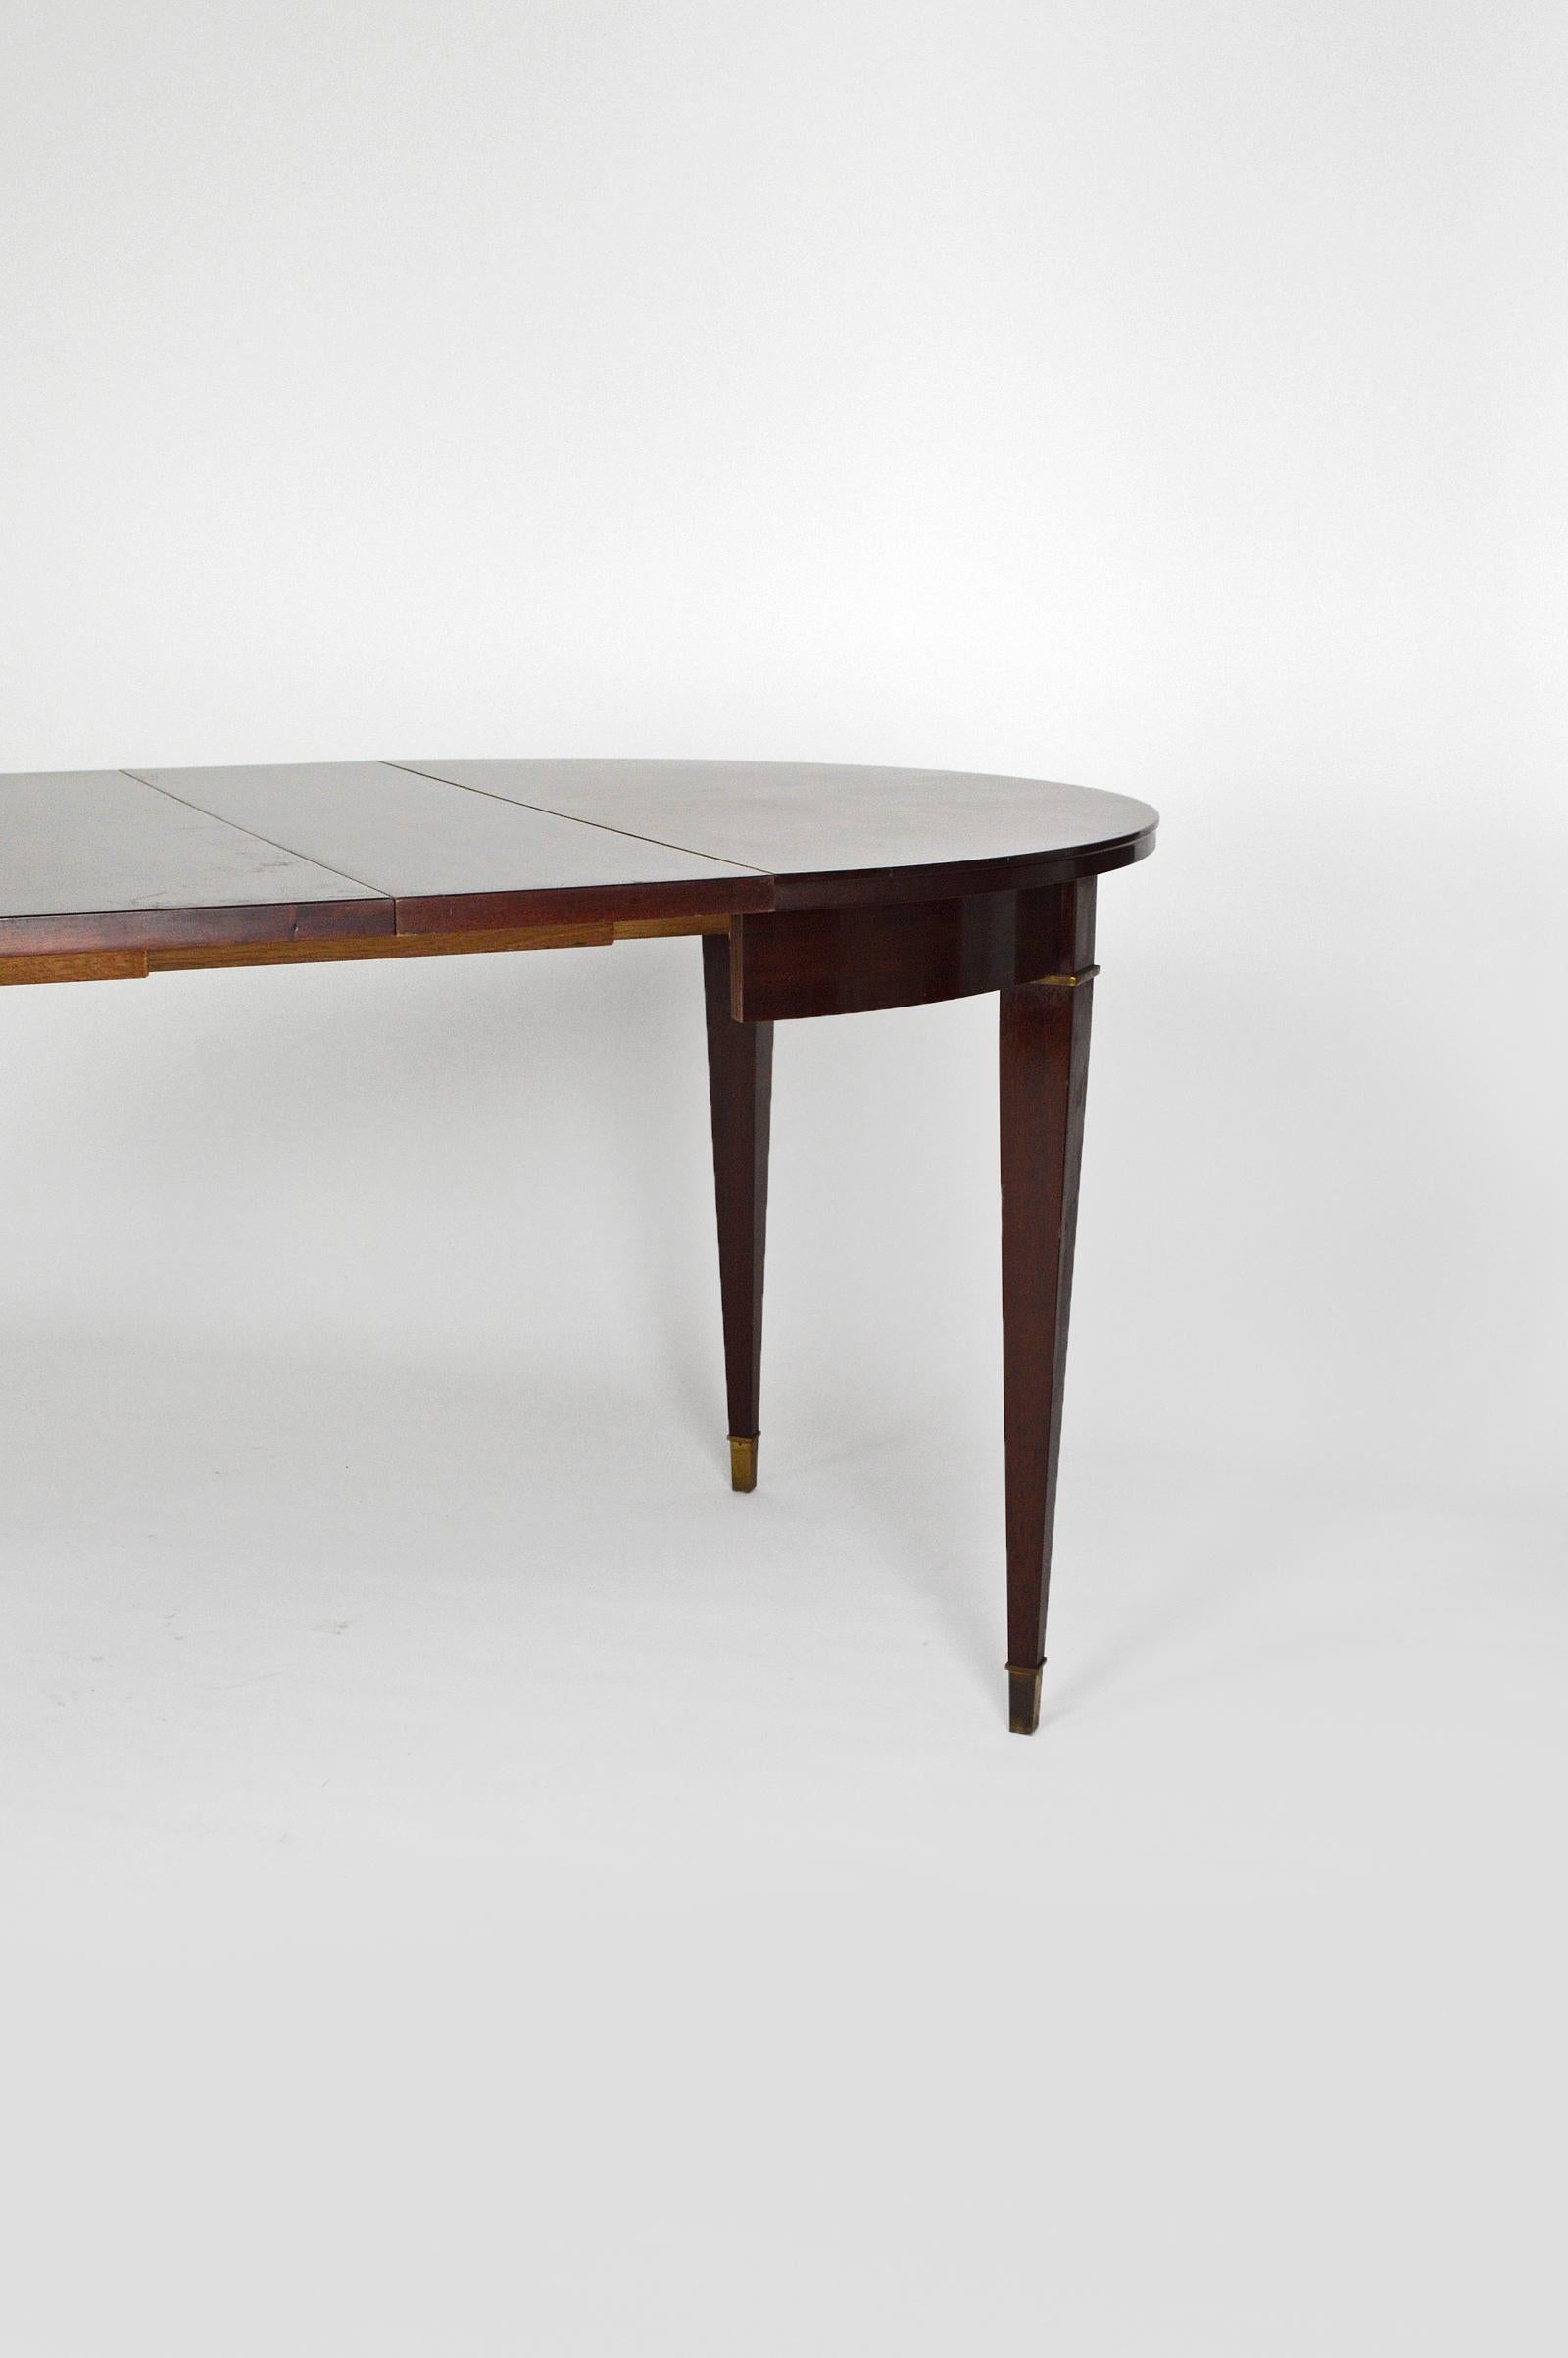 Art Deco Mahogany Round Table with Extensions, by Jacques Adnet, circa 1940 For Sale 6